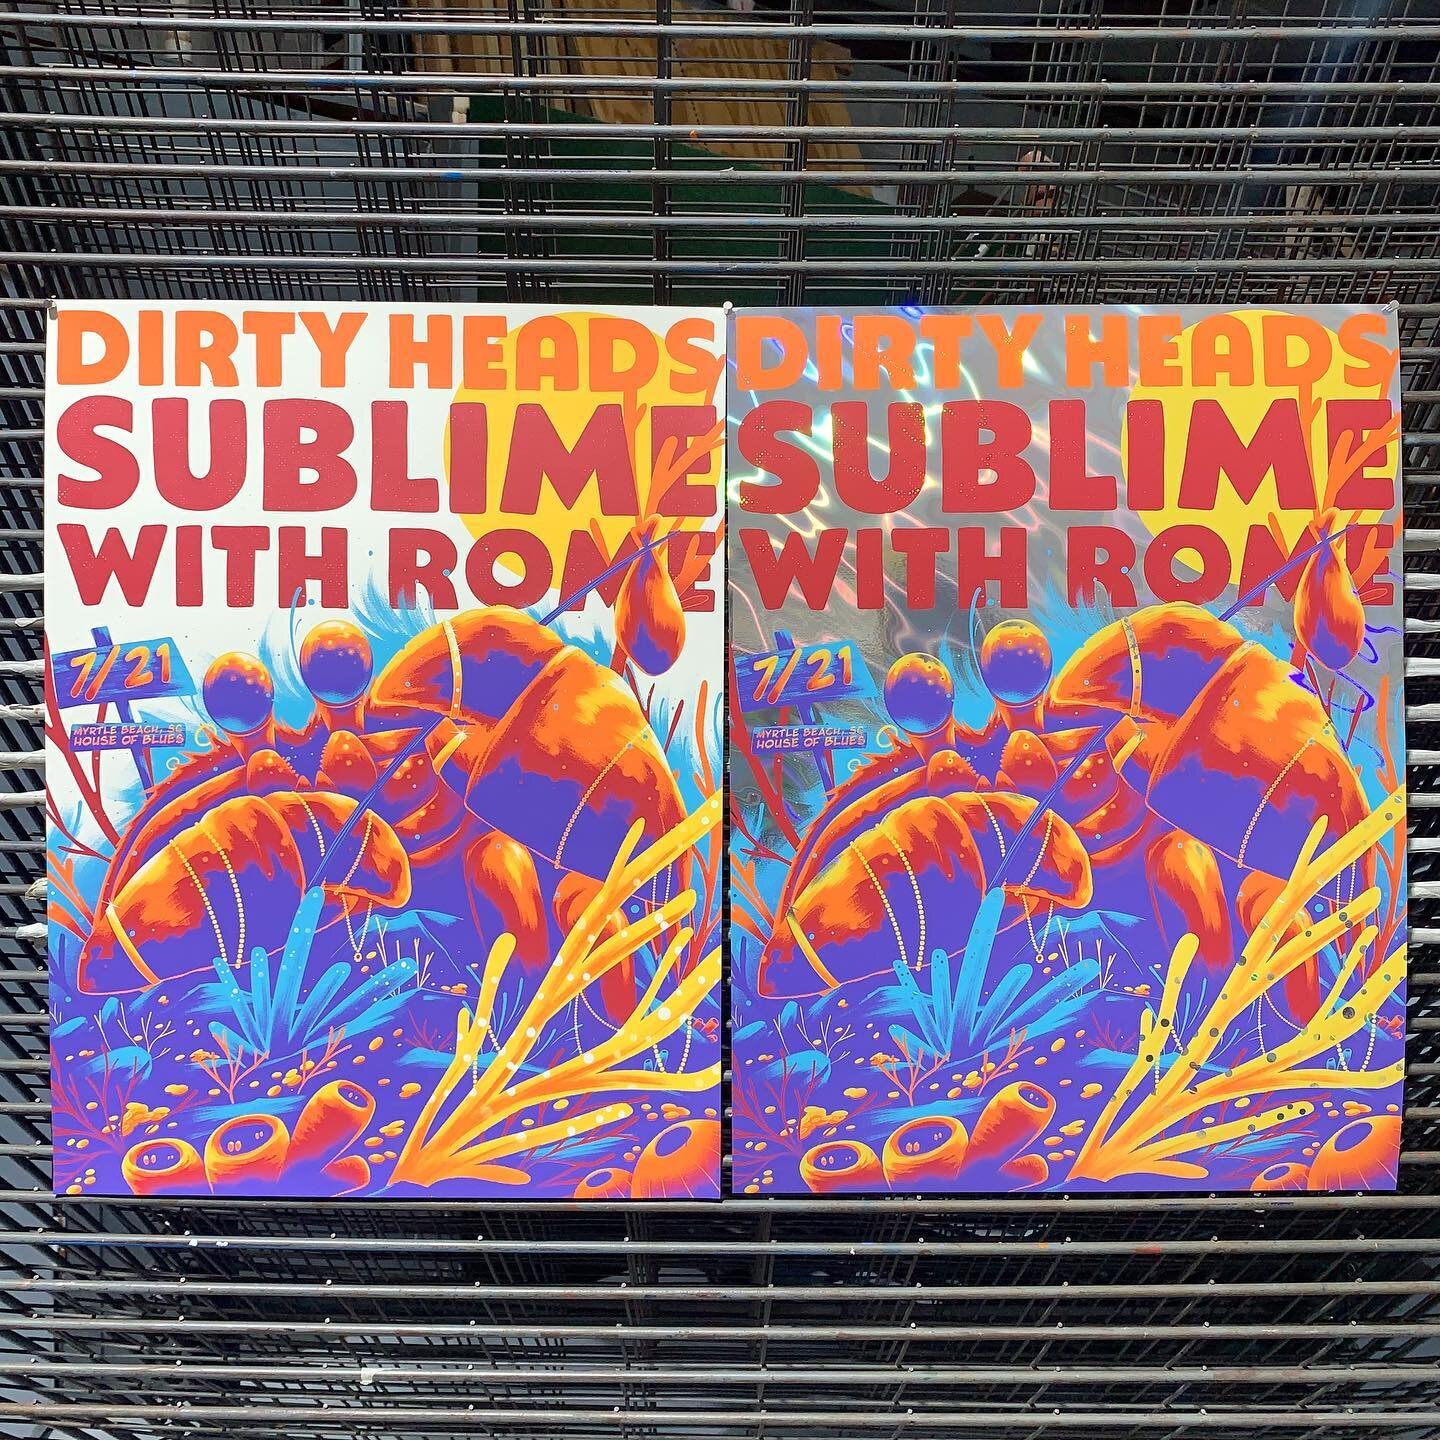 Super stoked on these amazing 5 color posters we got to print for @dirtyheads and @sublimewithrome summer tour!

Designed by @arnokiss

Printed on @frenchpaperco Madero Beach and foil variants on Brilliance Metallic Lava Foil
&bull;
&bull;
&bull;
&bu